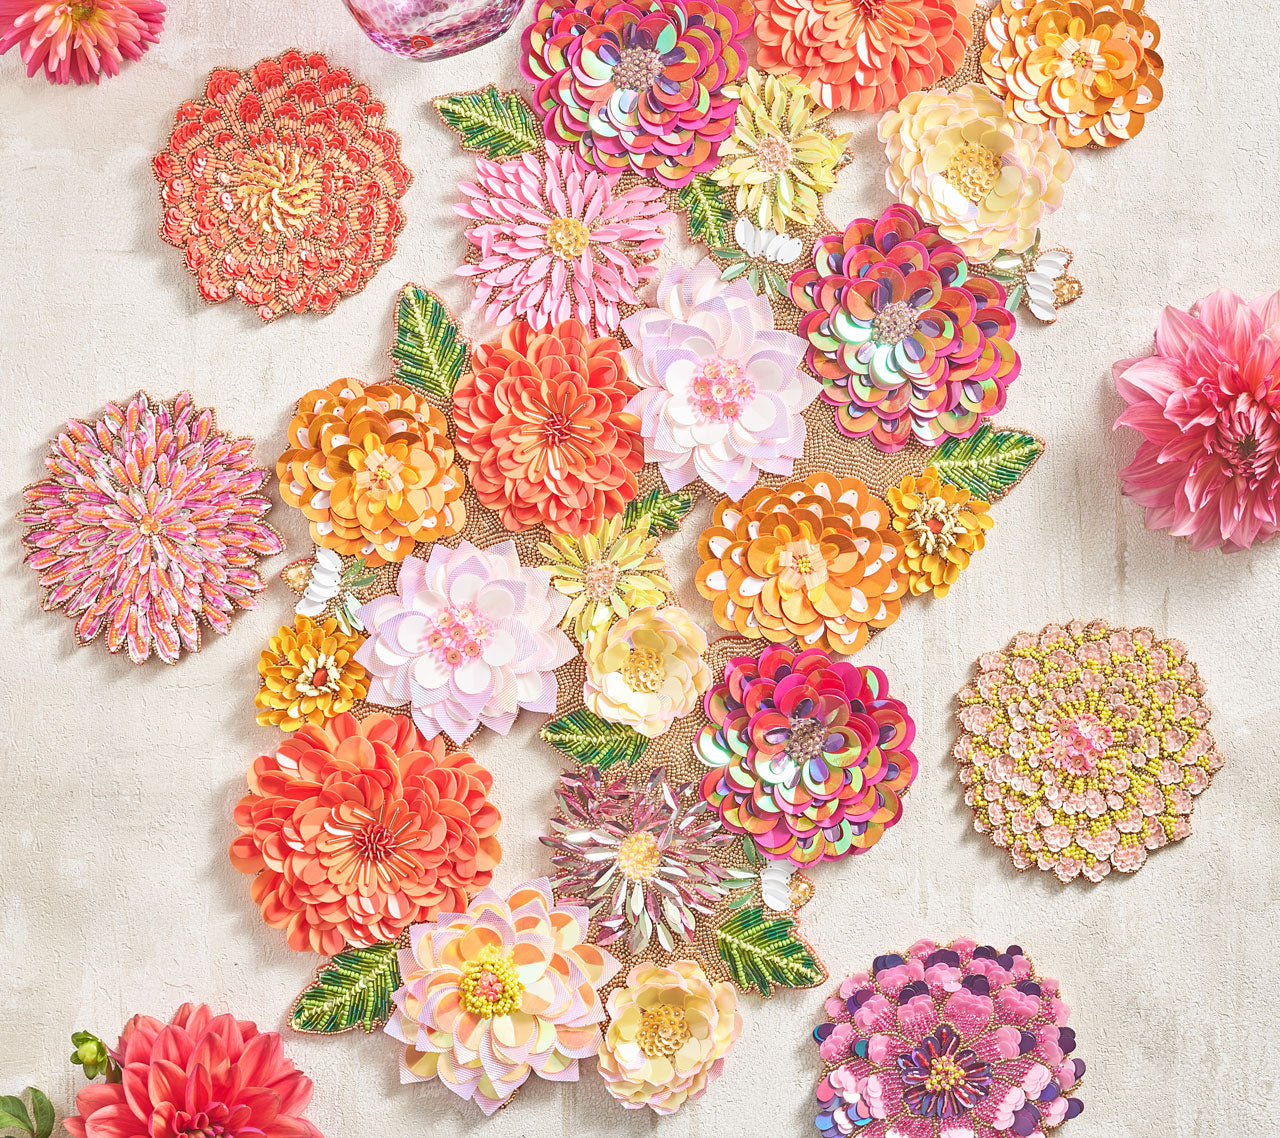 Beaded Dahlia Runner in tones of pink, orange and amethyst shown with floral drink coasters